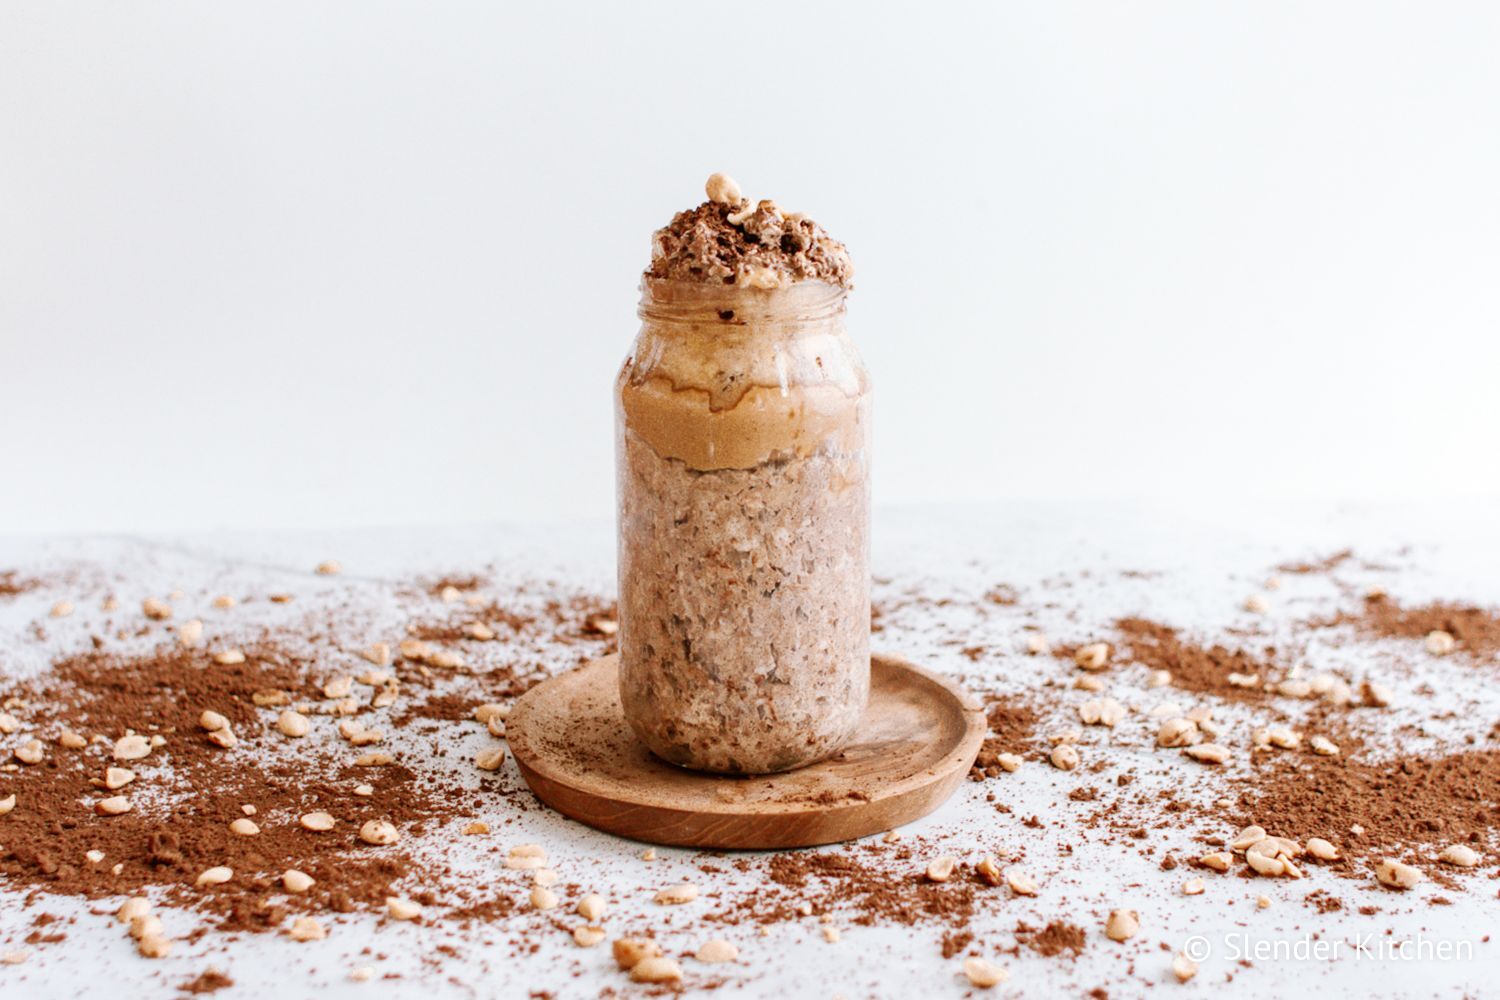 Chocolate peanut butter overnight oats in a glass jar with peanut butter and cocoa powder.